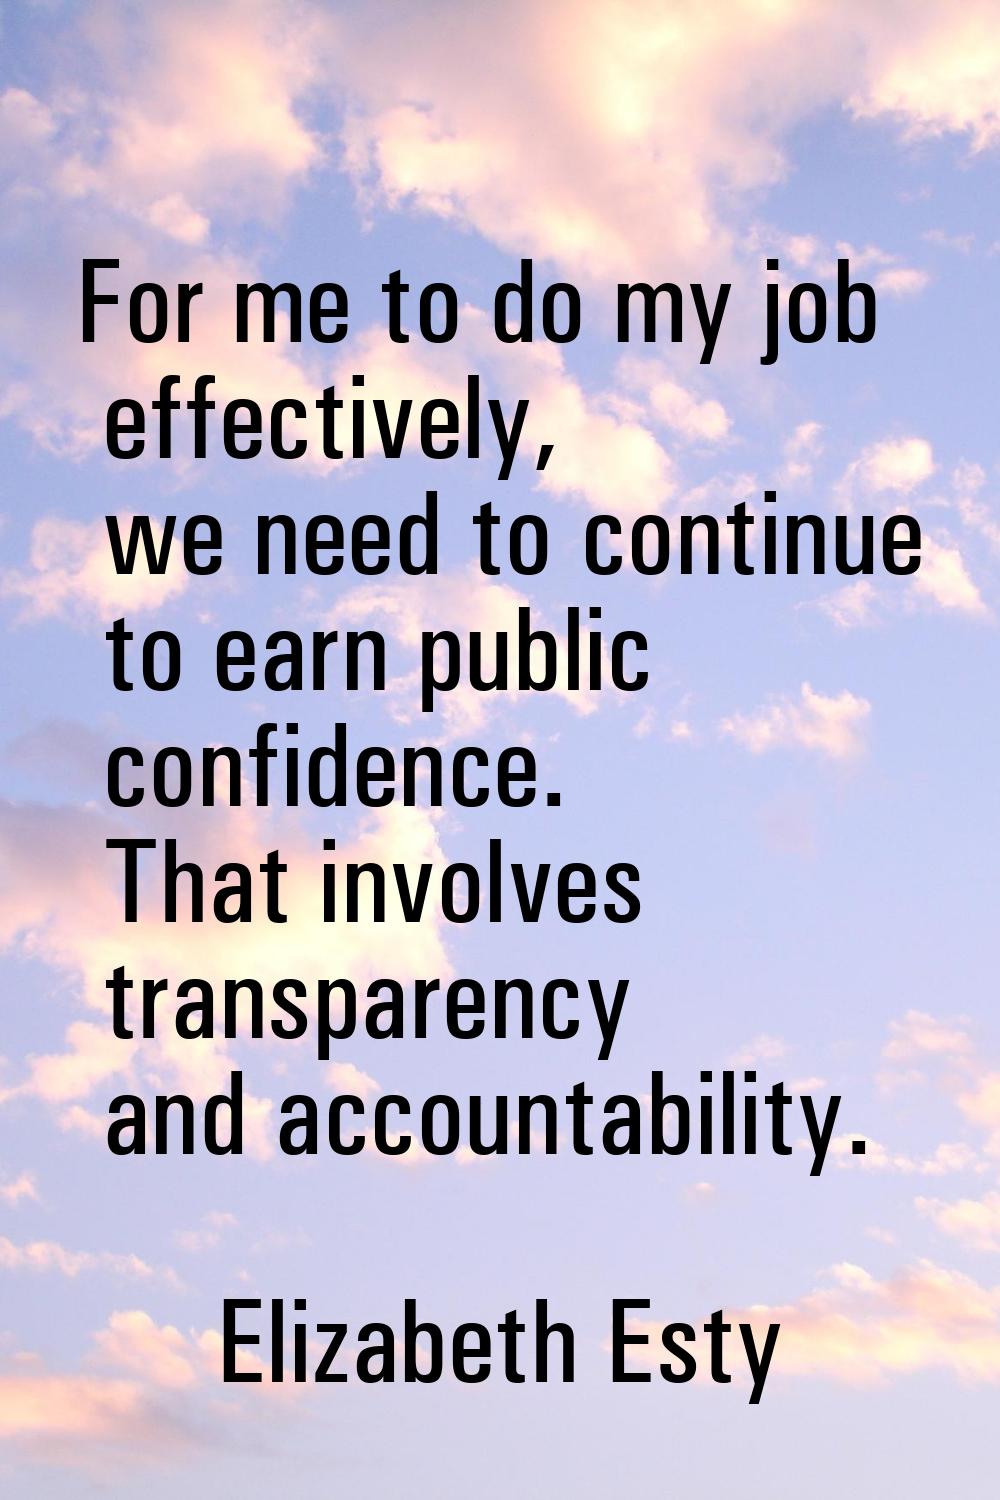 For me to do my job effectively, we need to continue to earn public confidence. That involves trans